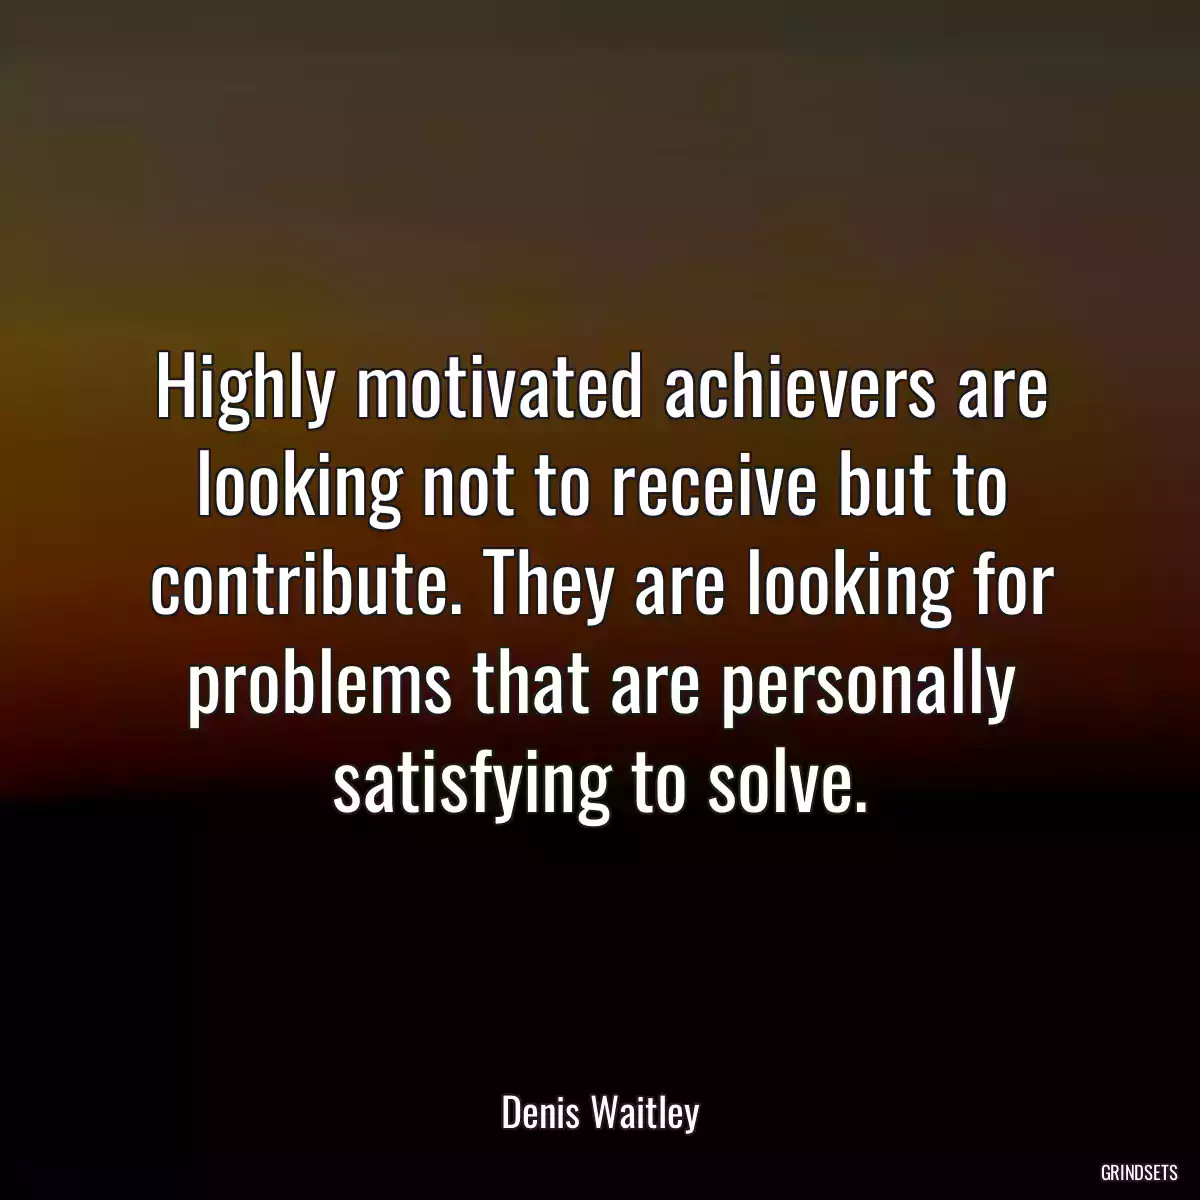 Highly motivated achievers are looking not to receive but to contribute. They are looking for problems that are personally satisfying to solve.